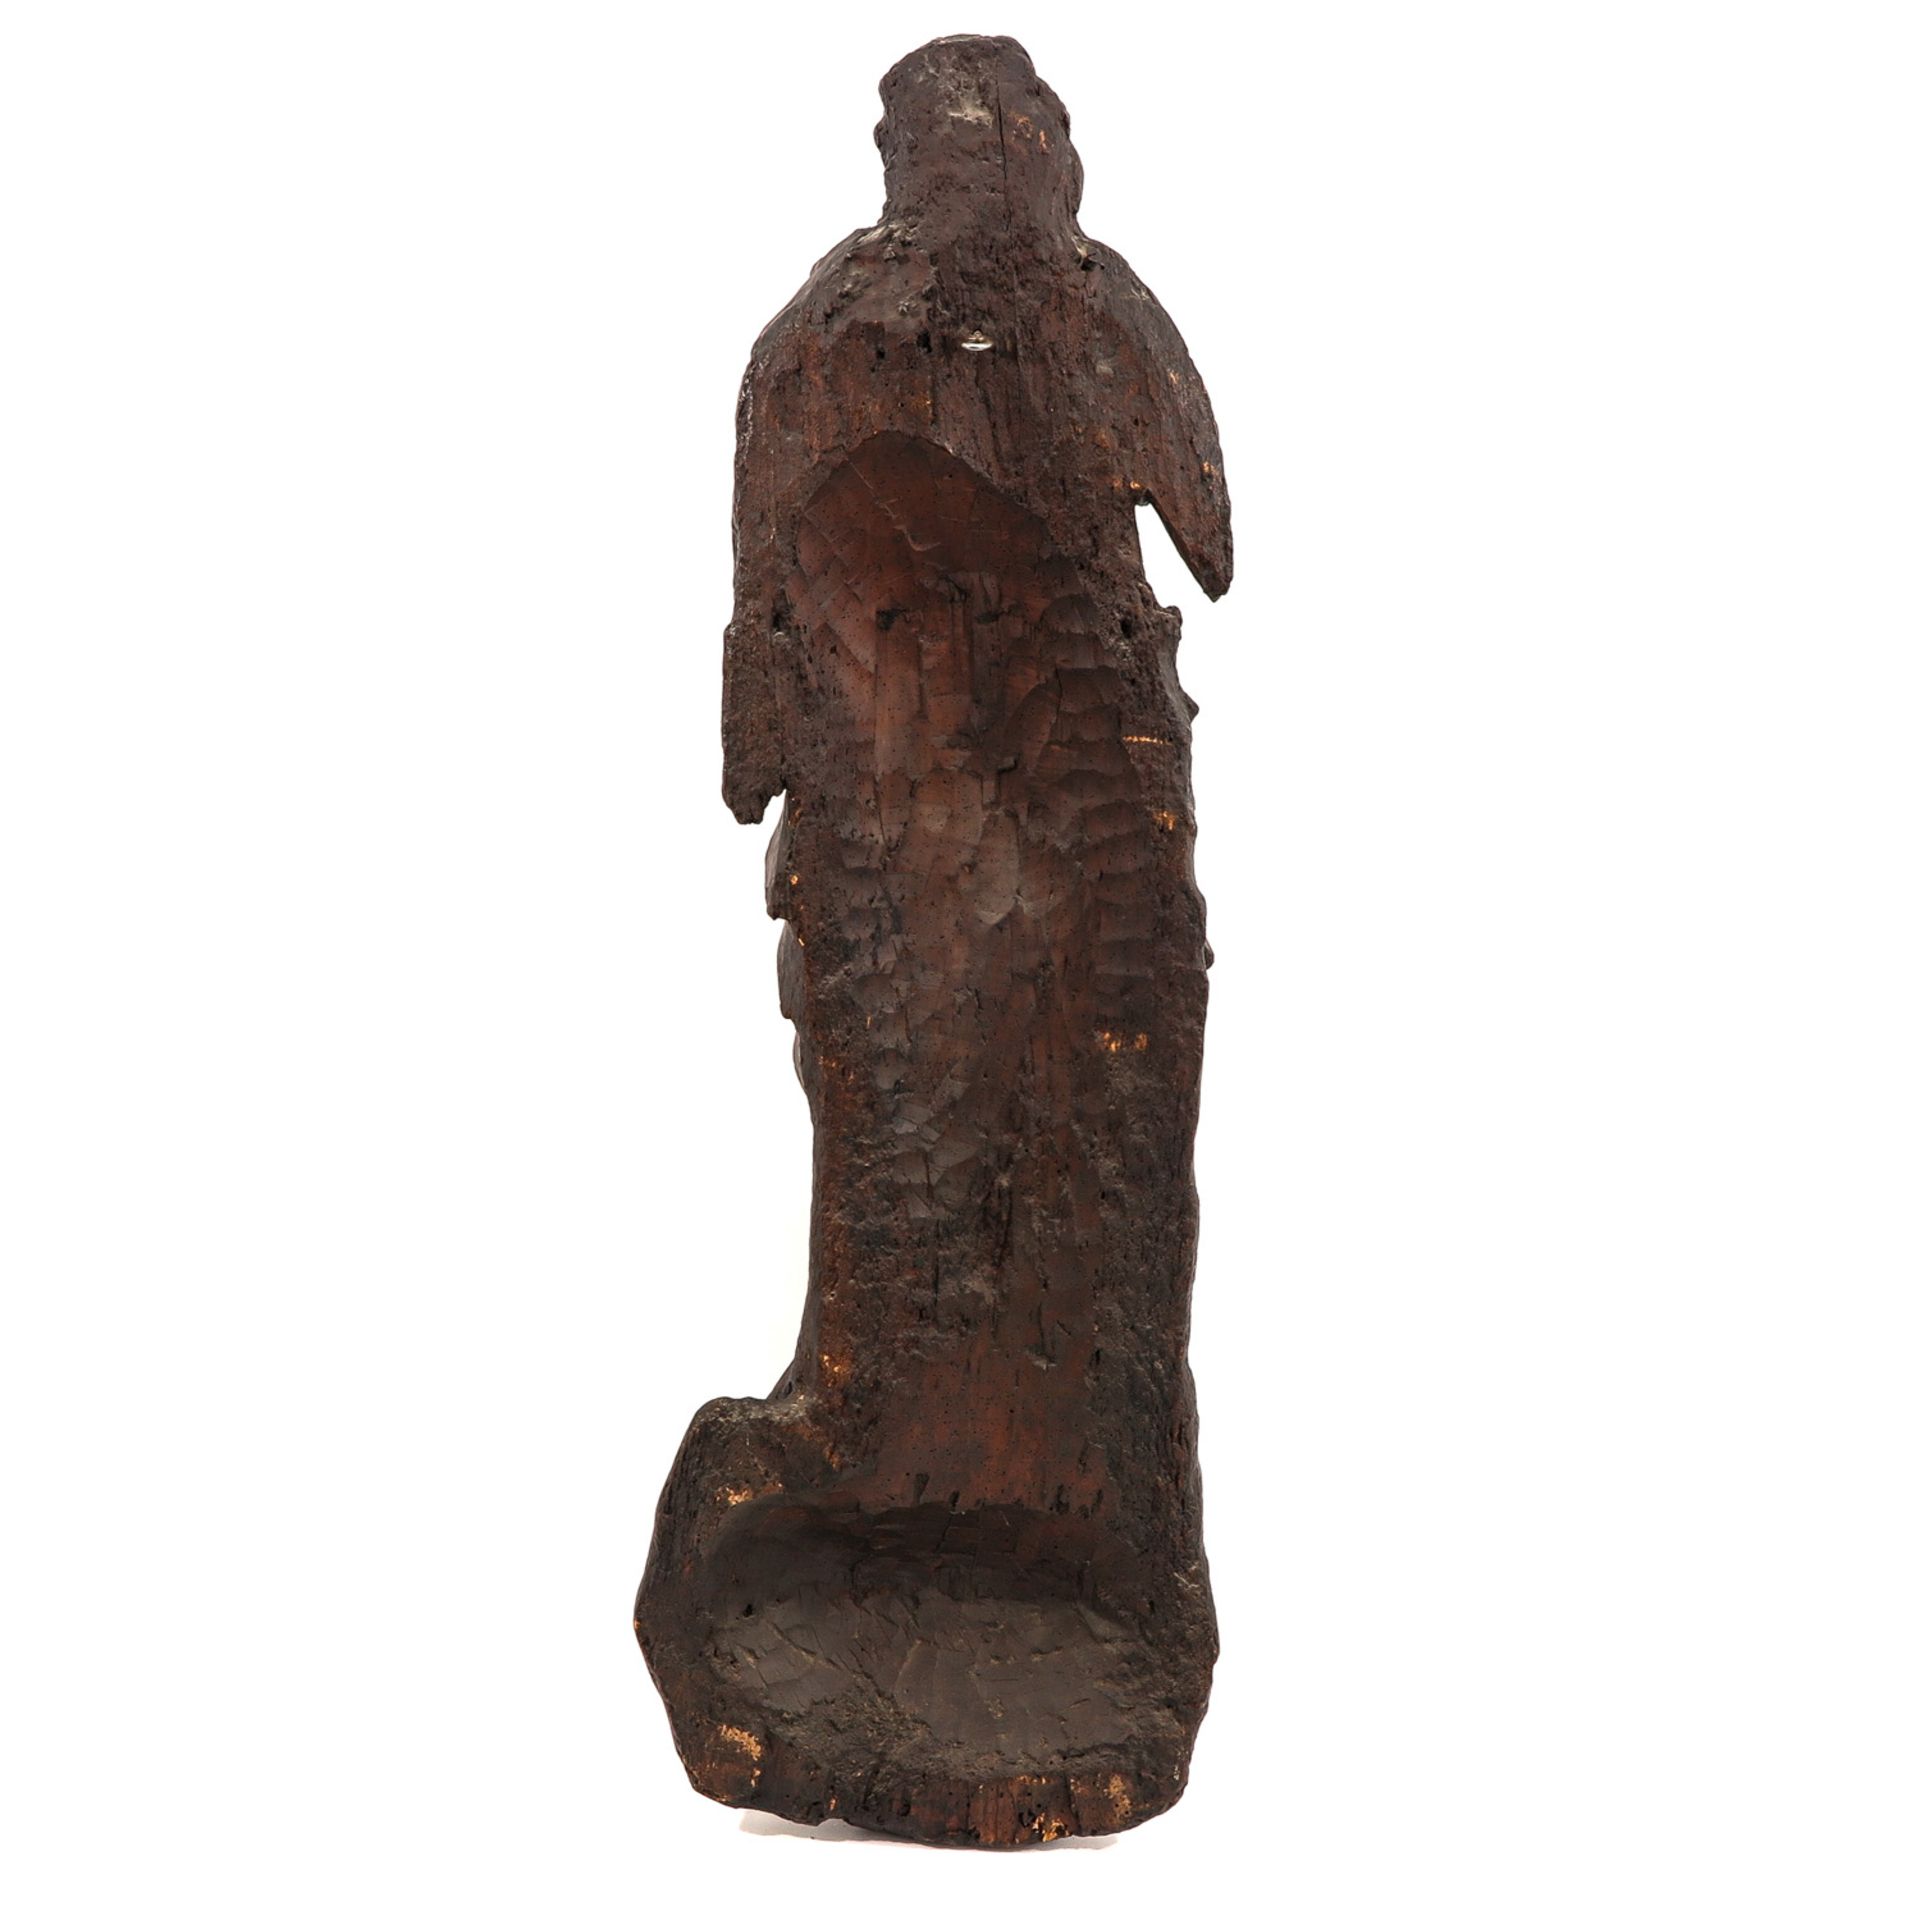 A 16th - 17th Century Religious Sculpture - Image 2 of 8